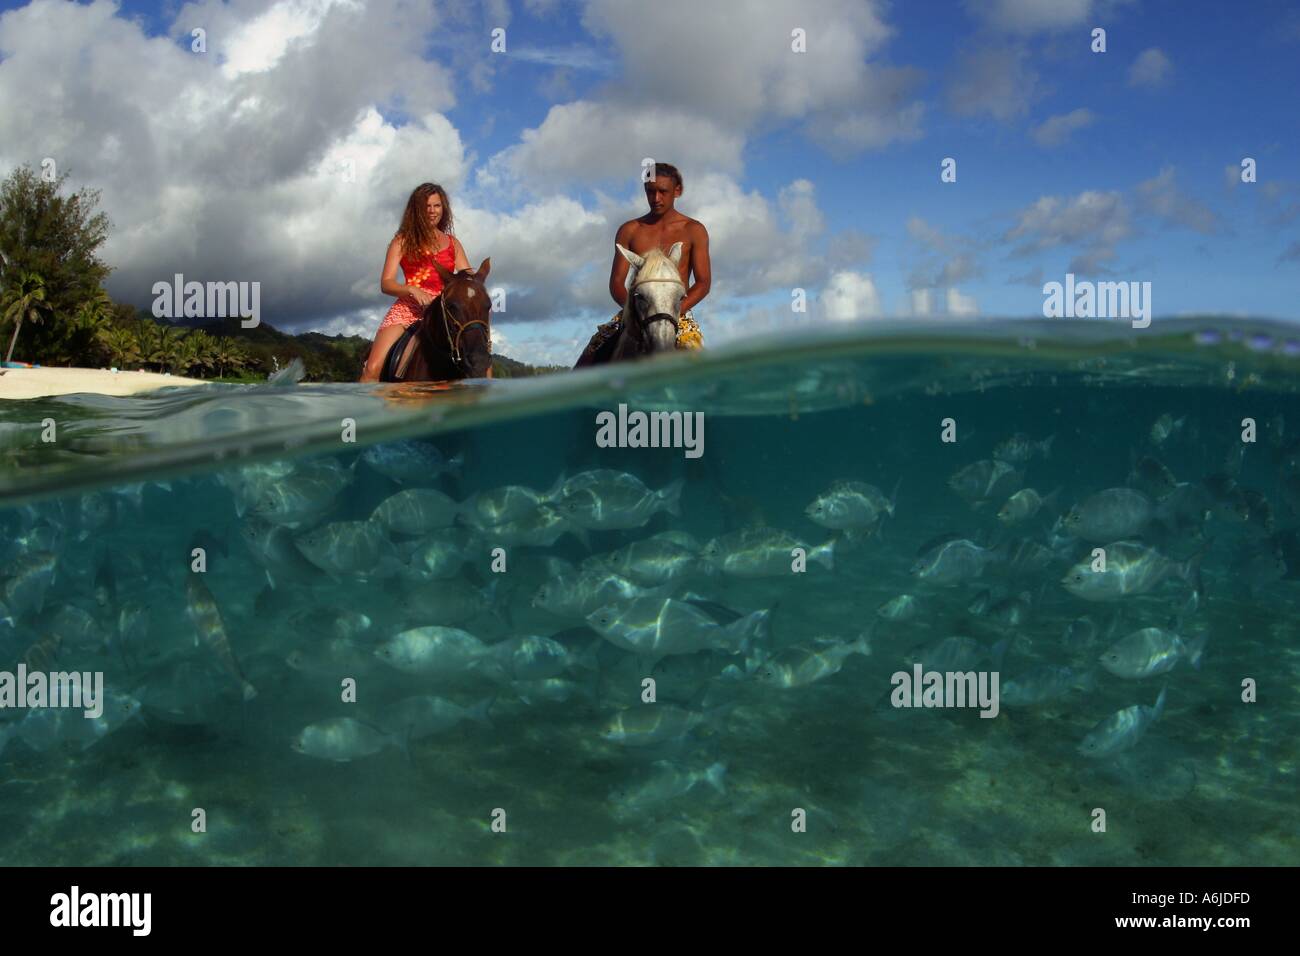 COUPLE MR ON HORSEBACK WITH FISH COOK ISLANDS Stock Photo